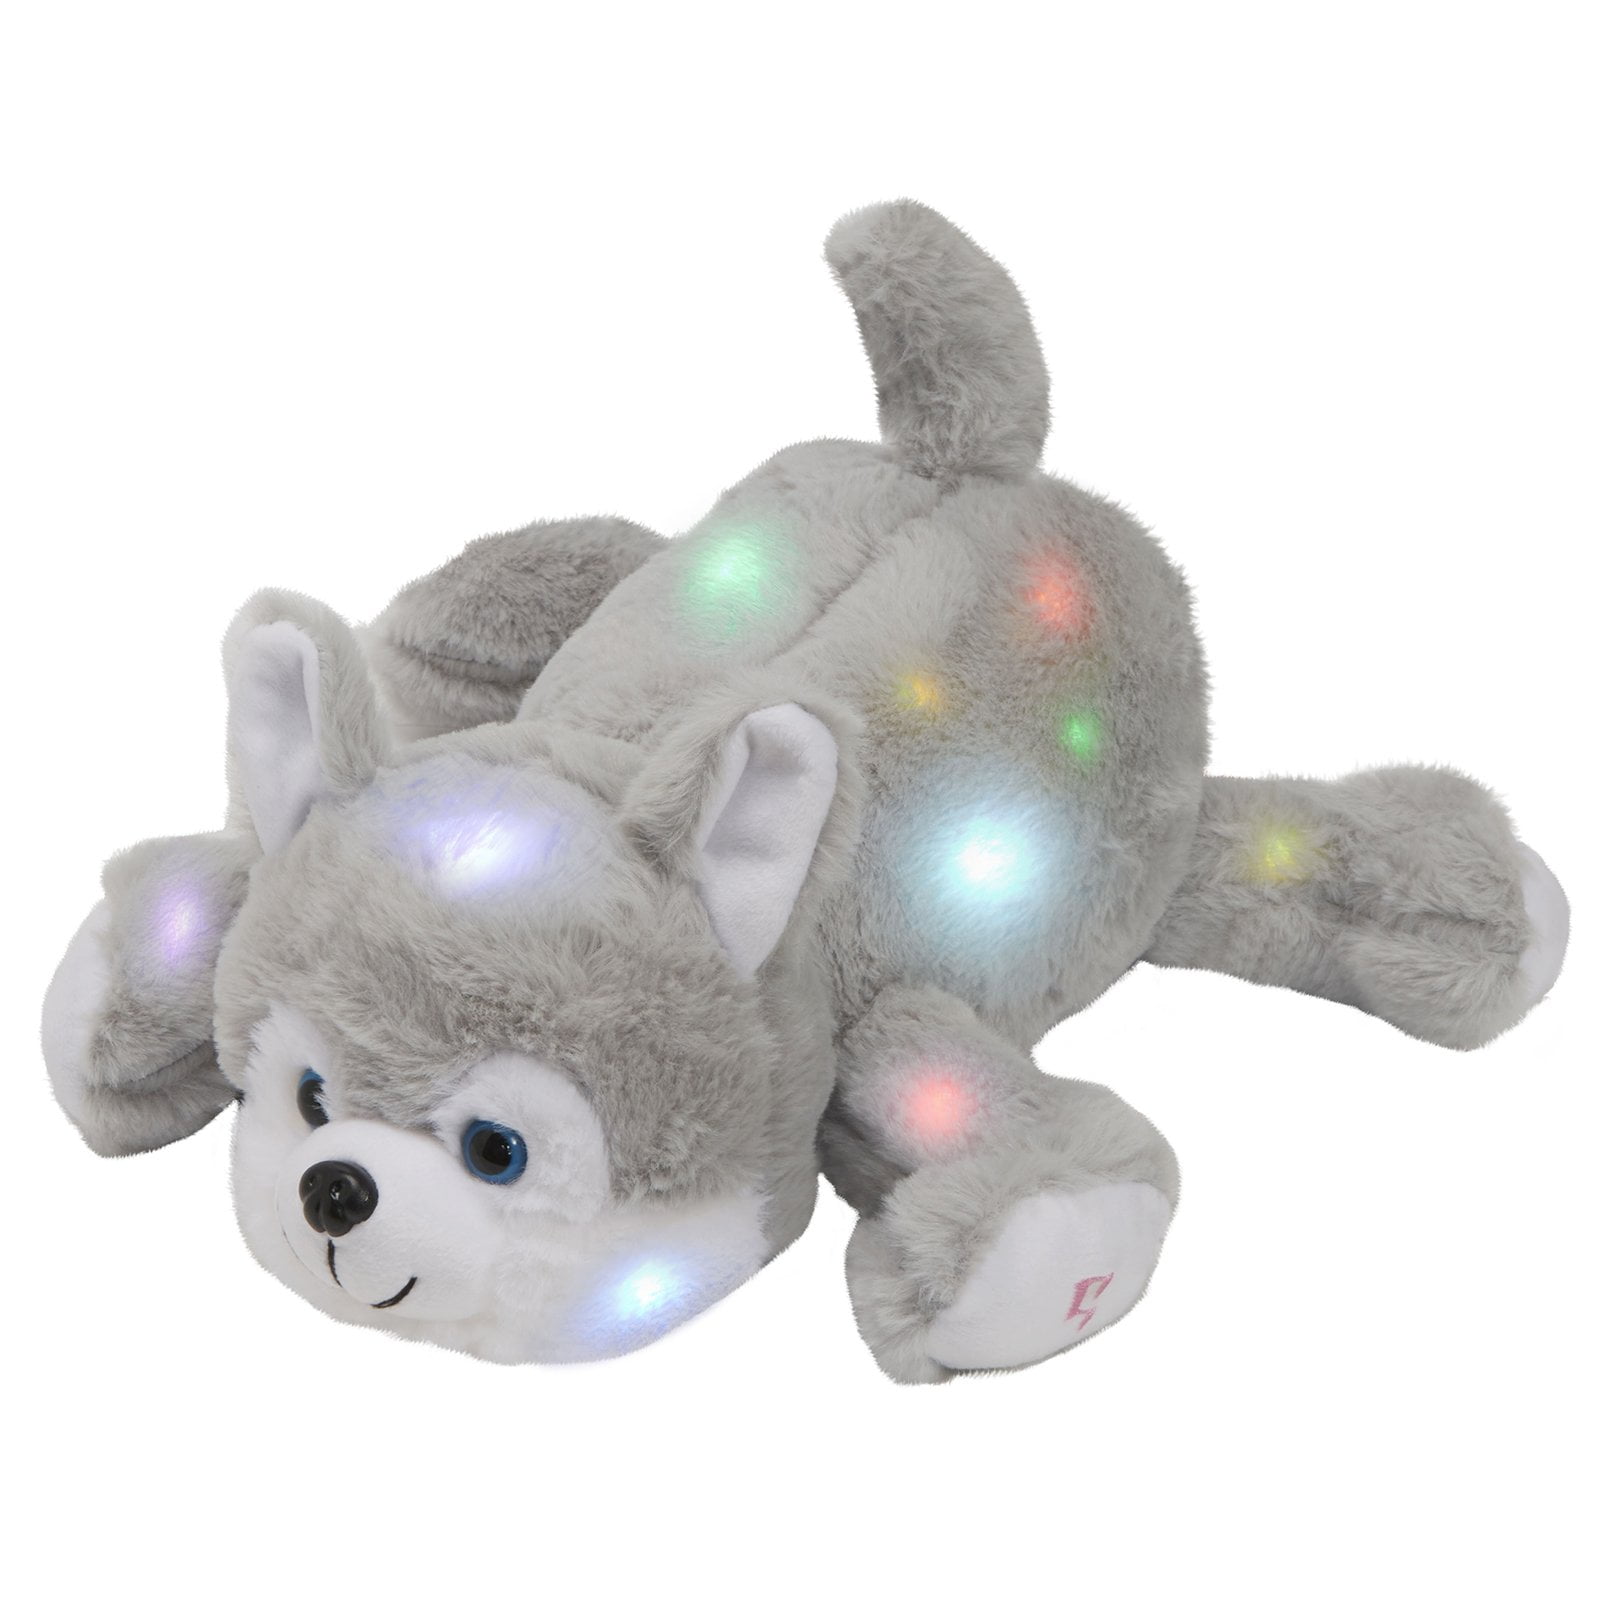 SpecialYou Glow Dragon Light Up Stuffed Animal Soft LED Plush Toy Glitter Gift for Kids Boys Girls Companion Pet Present for Holiday Birthday Purple. 